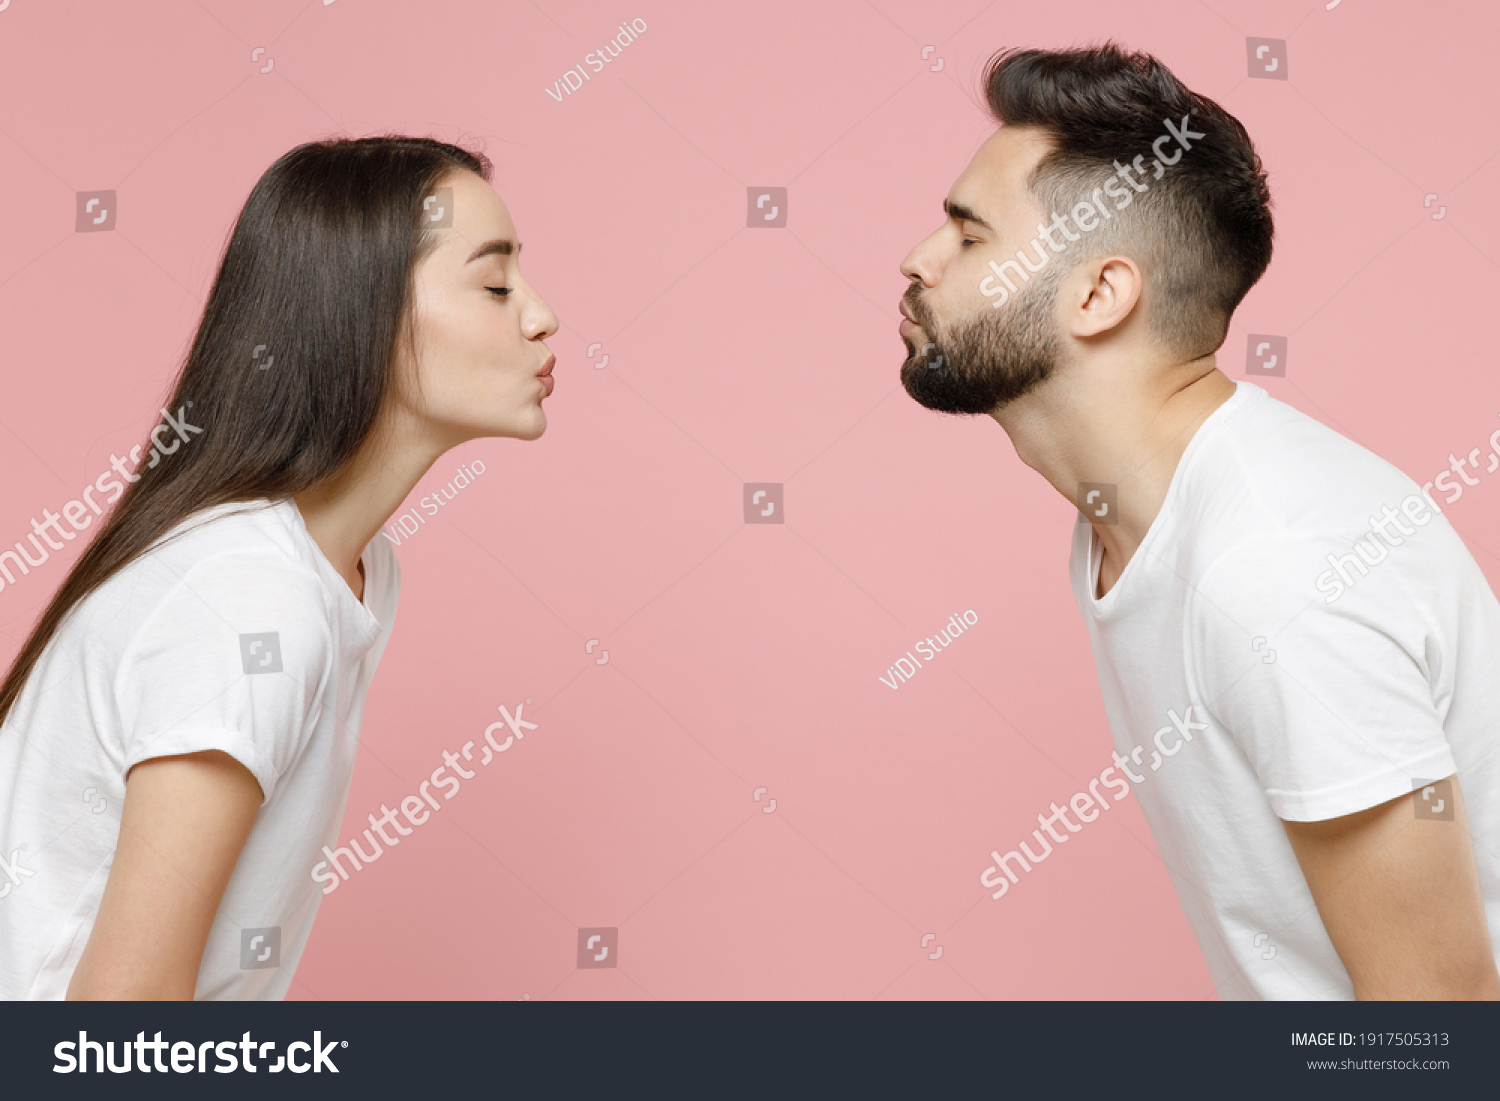 Side profile view young cheerful couple two friends man woman in white basic t-shirts kissing each other with closed eyes while standing face to face isolated on pastel pink background studio portrait #1917505313